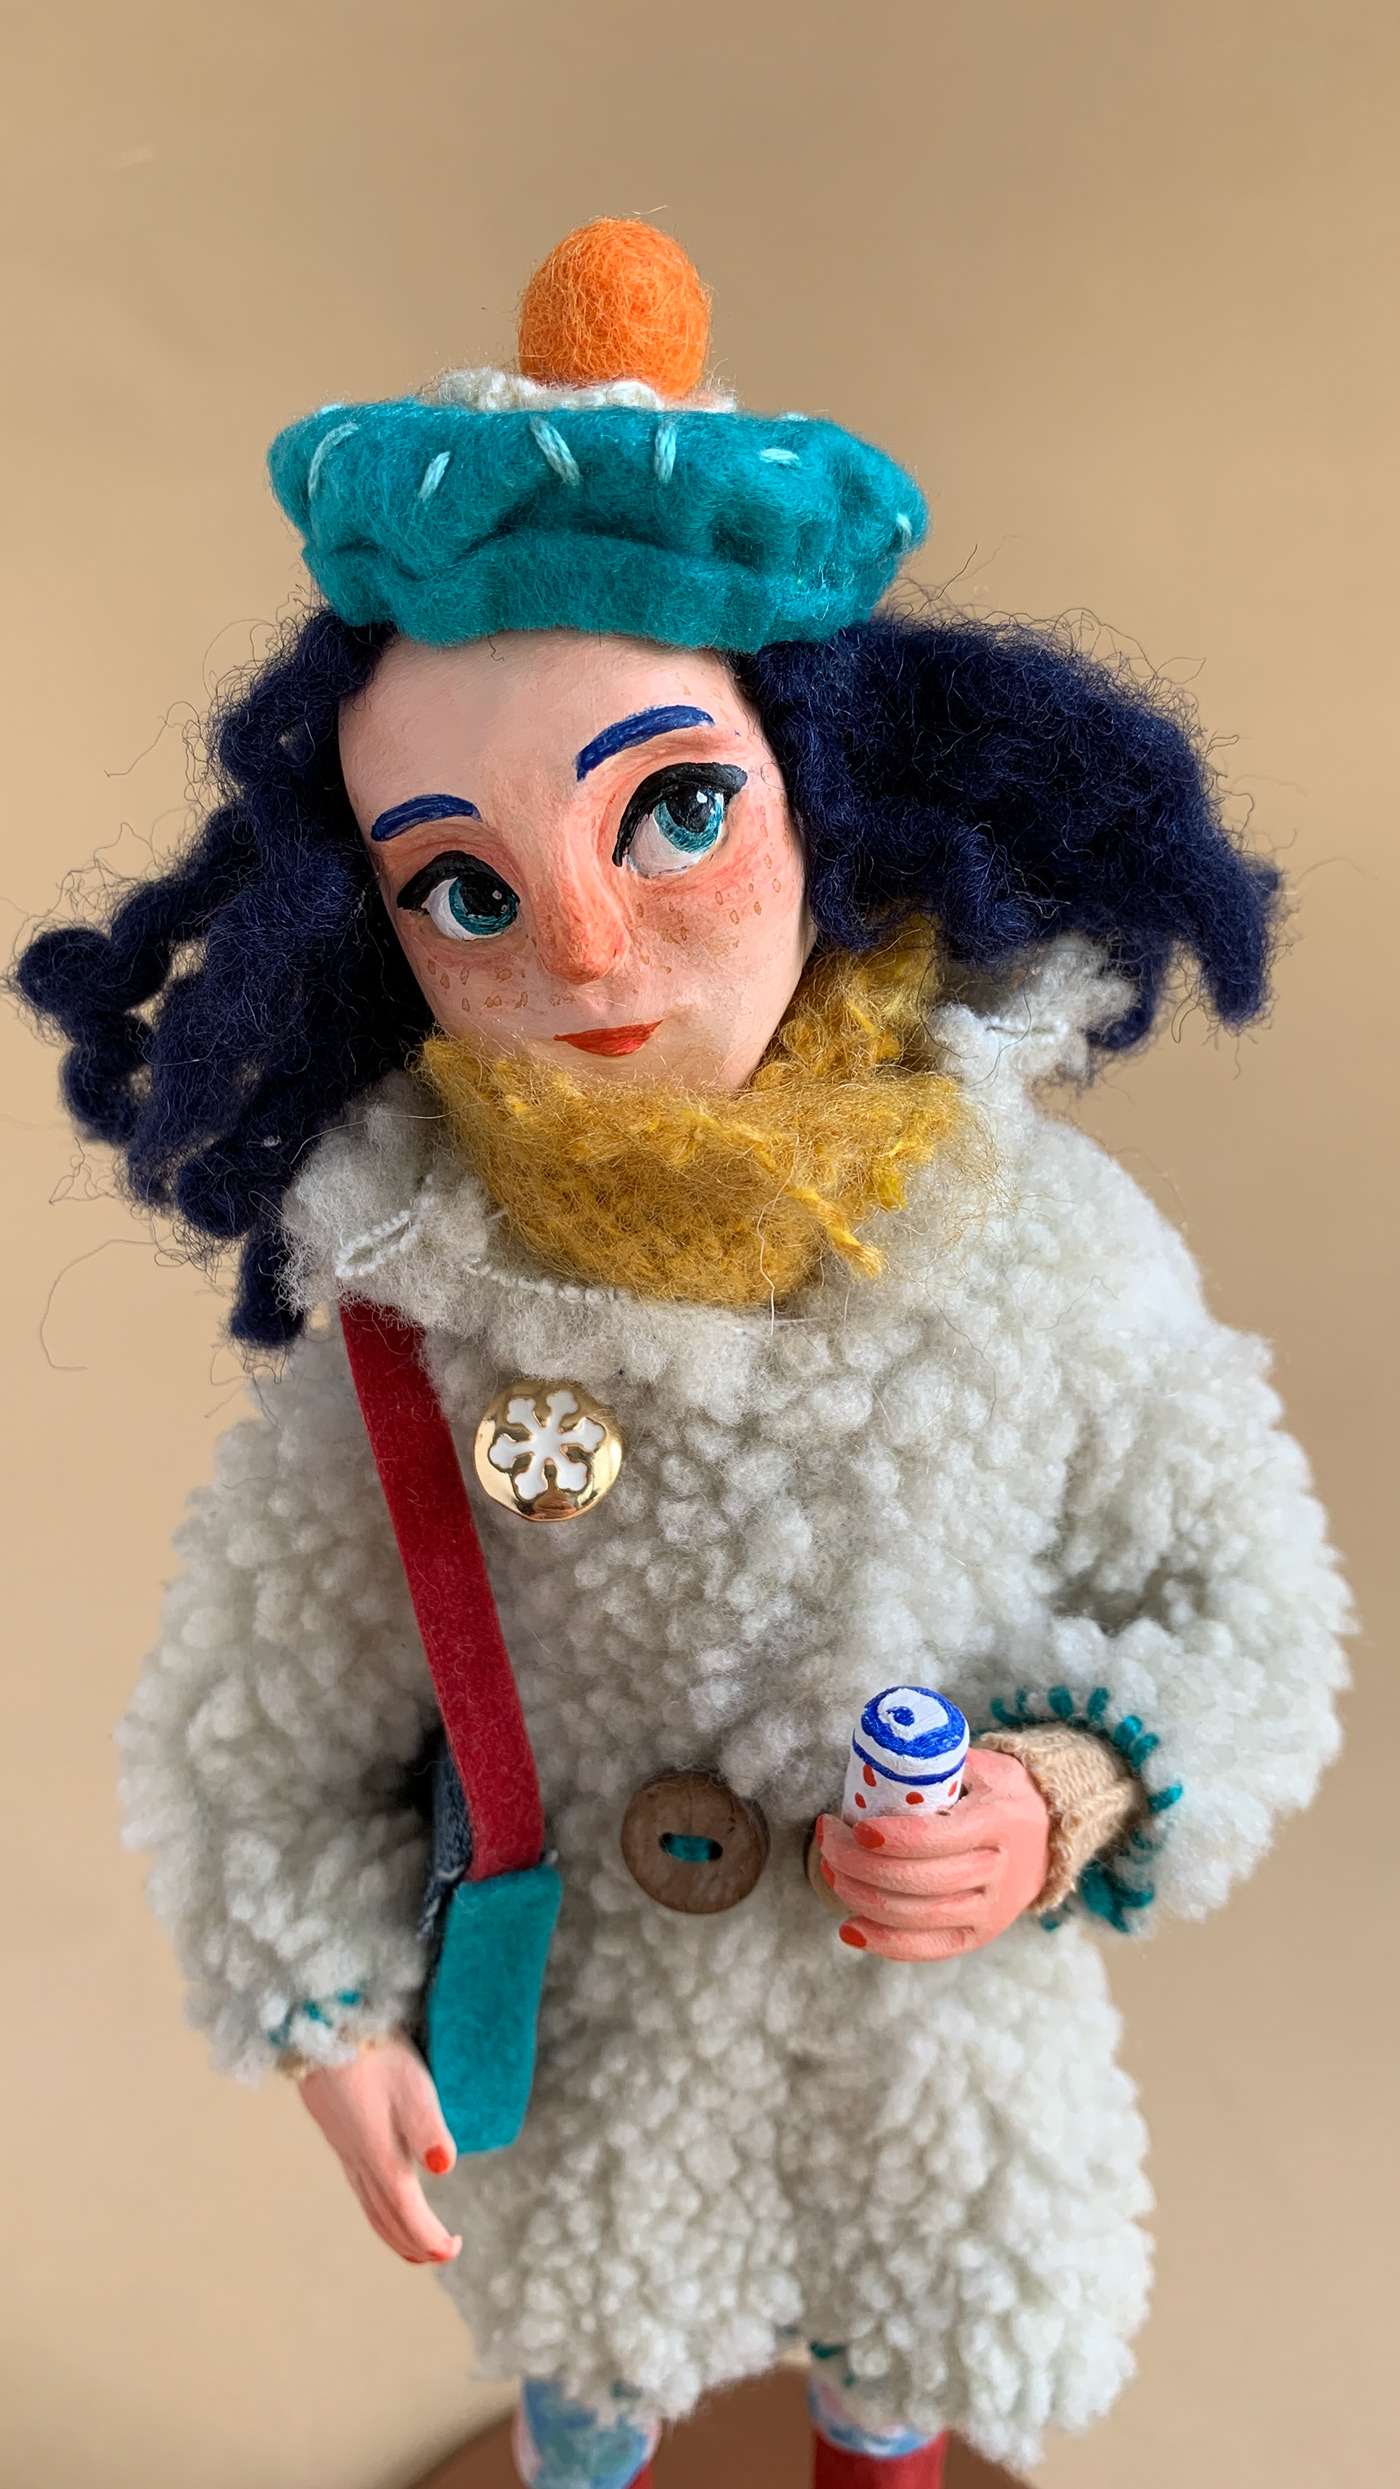 art doll Art Doll Sculpture art toy Character Character design  collectible doll handmade doll handmade figure toy design  toy maker